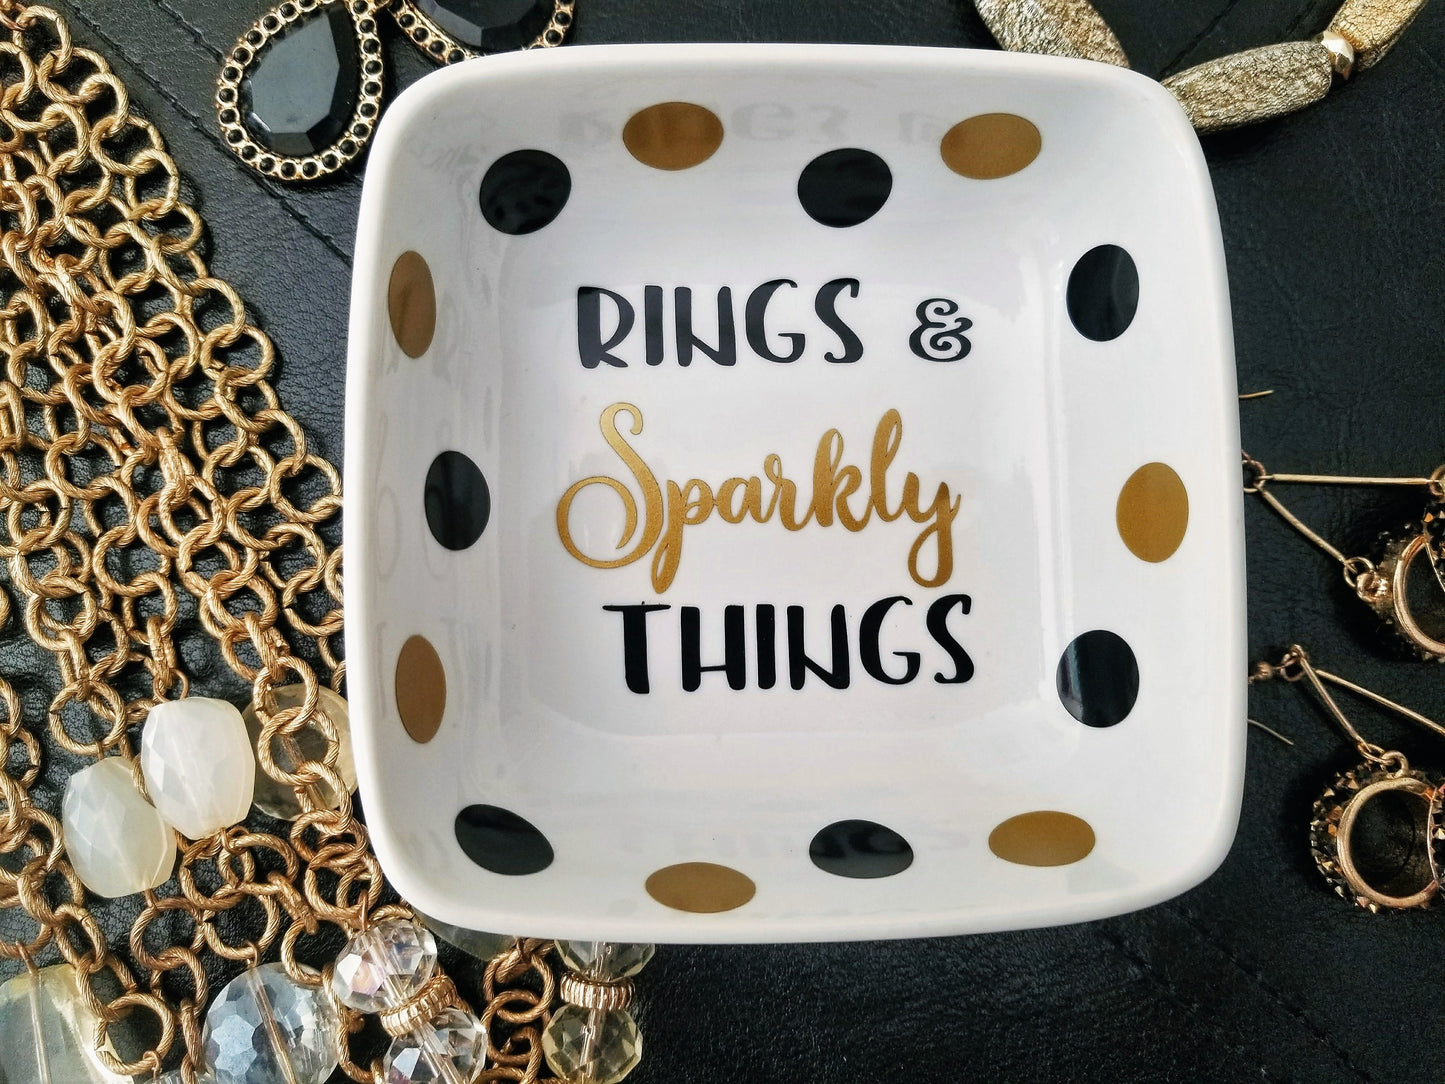 Rings & Sparkly Things Jewelry Dish